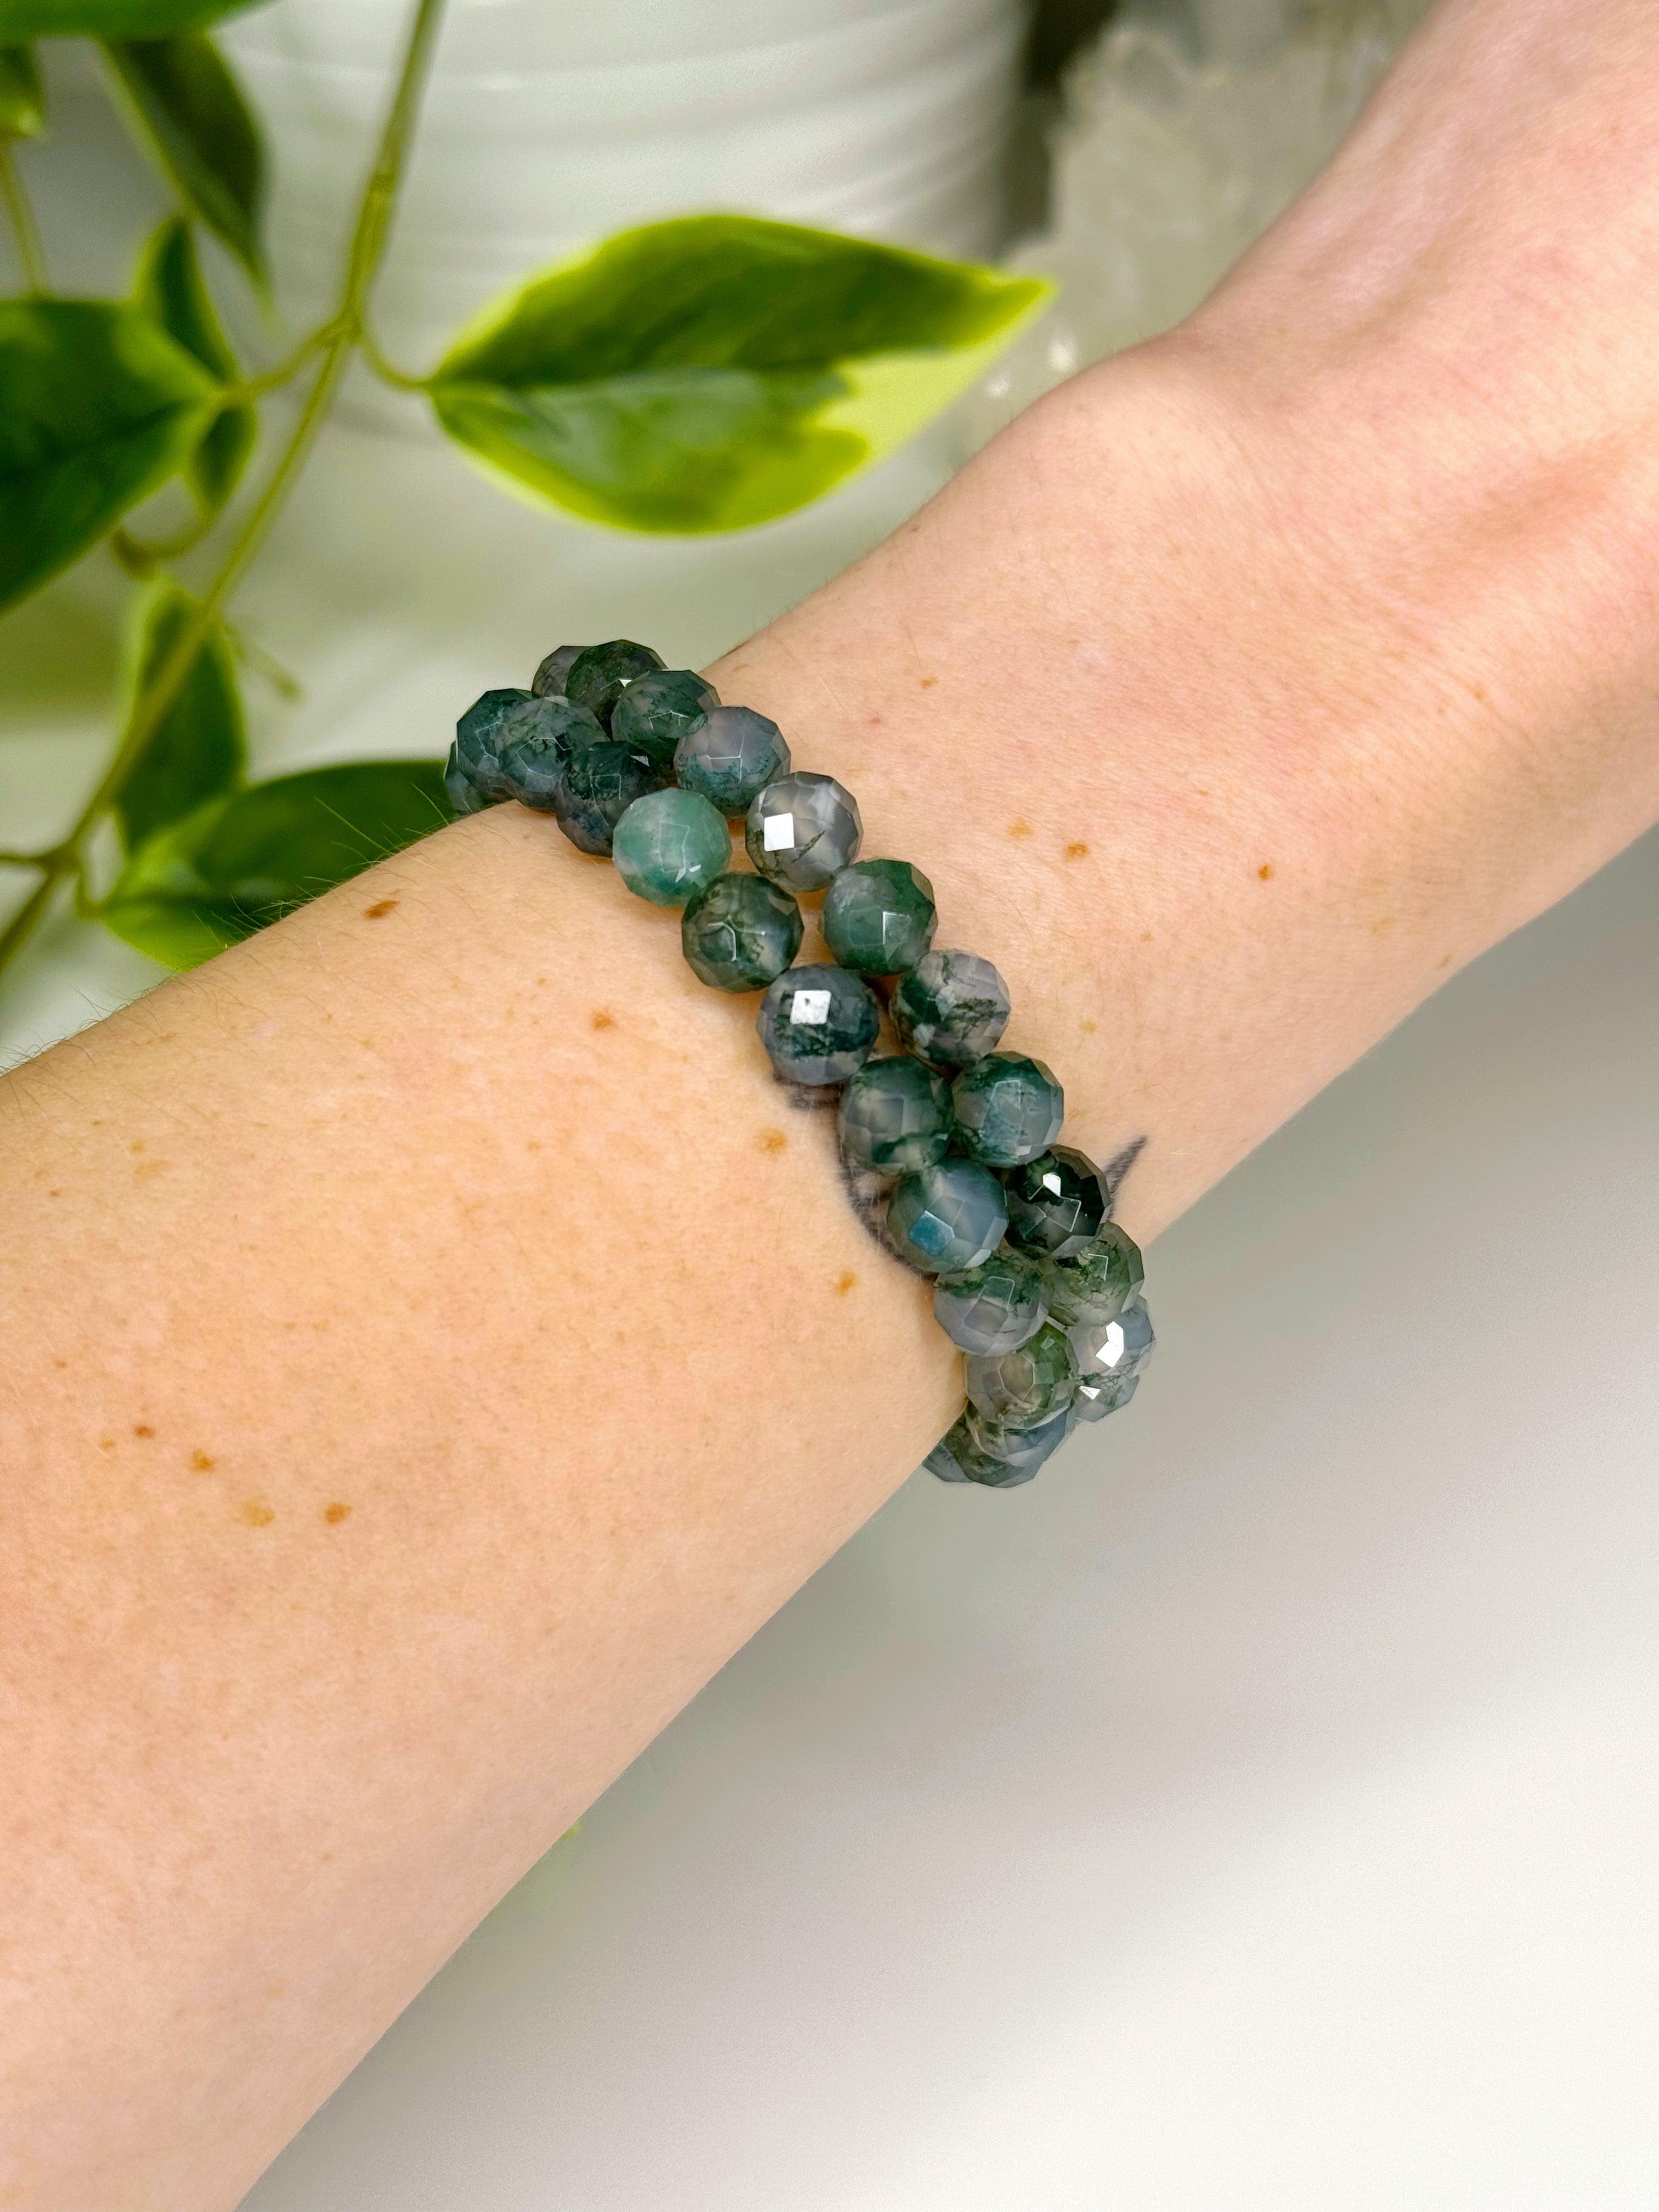 MOSS AGATE (FACETED) 8mm - HANDMADE CRYSTAL BRACELET - 8mm, bracelet, crystal bracelet, earth, faceted, handmade bracelet, jewelry, mercury retrograde stack, moss agate, recently added, spring collection, virgo, virgo stack, Wearable - The Mineral Maven